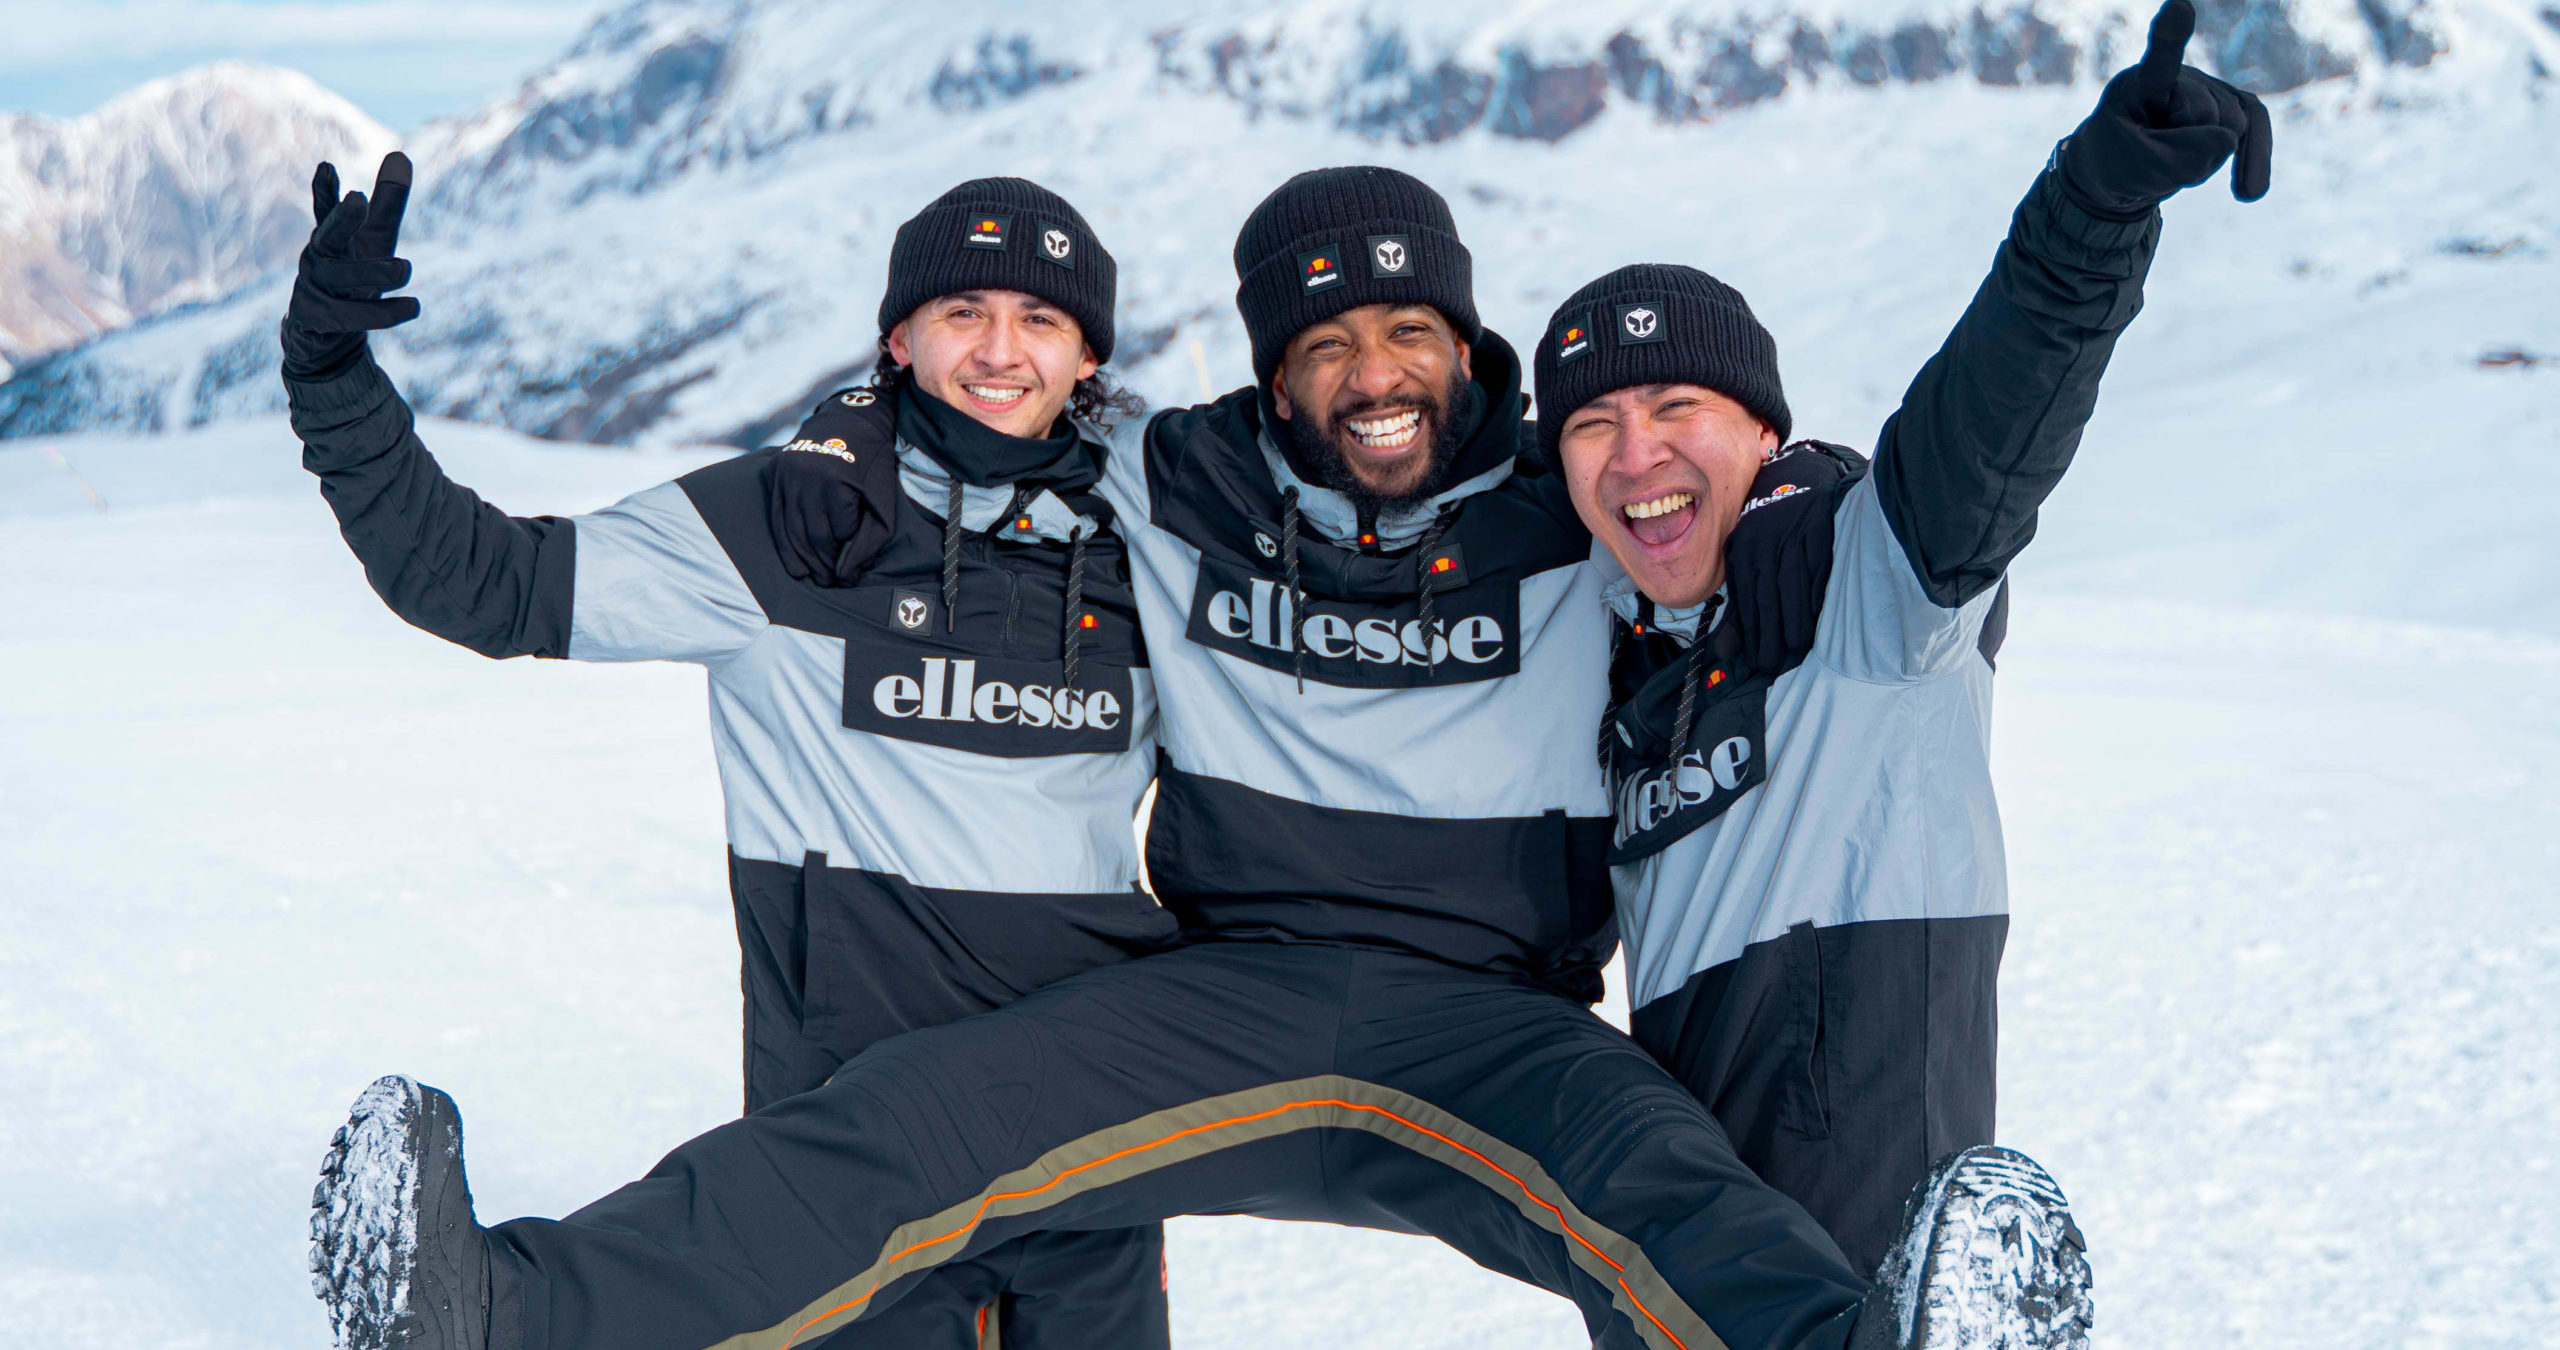 Tomorrowland places ellesse at the heart of ski culture